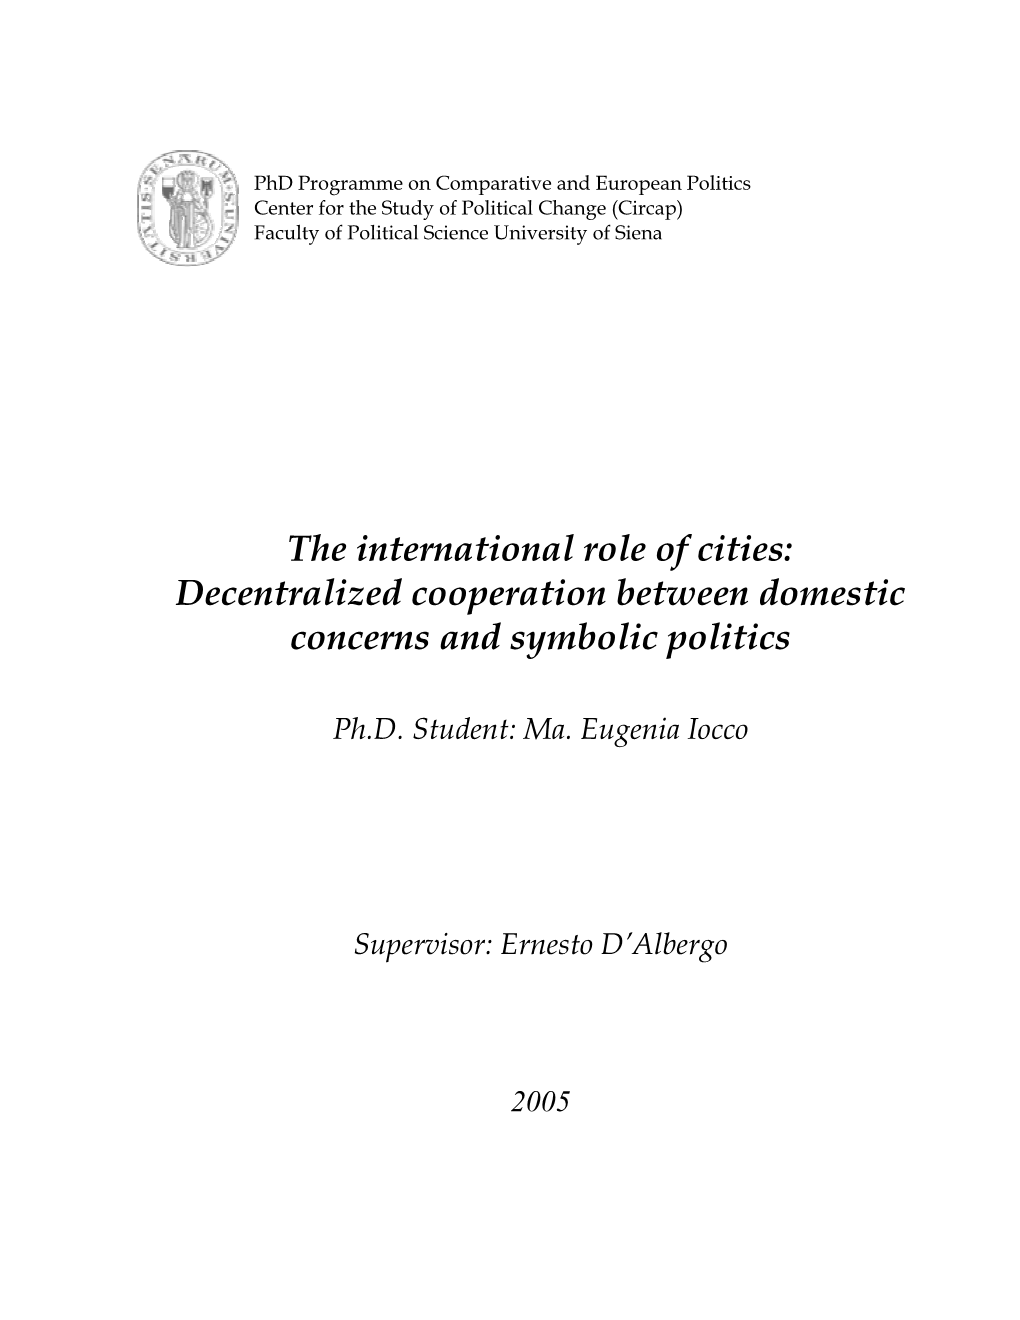 The International Role of Cities: Decentralized Cooperation Between Domestic Concerns and Symbolic Politics